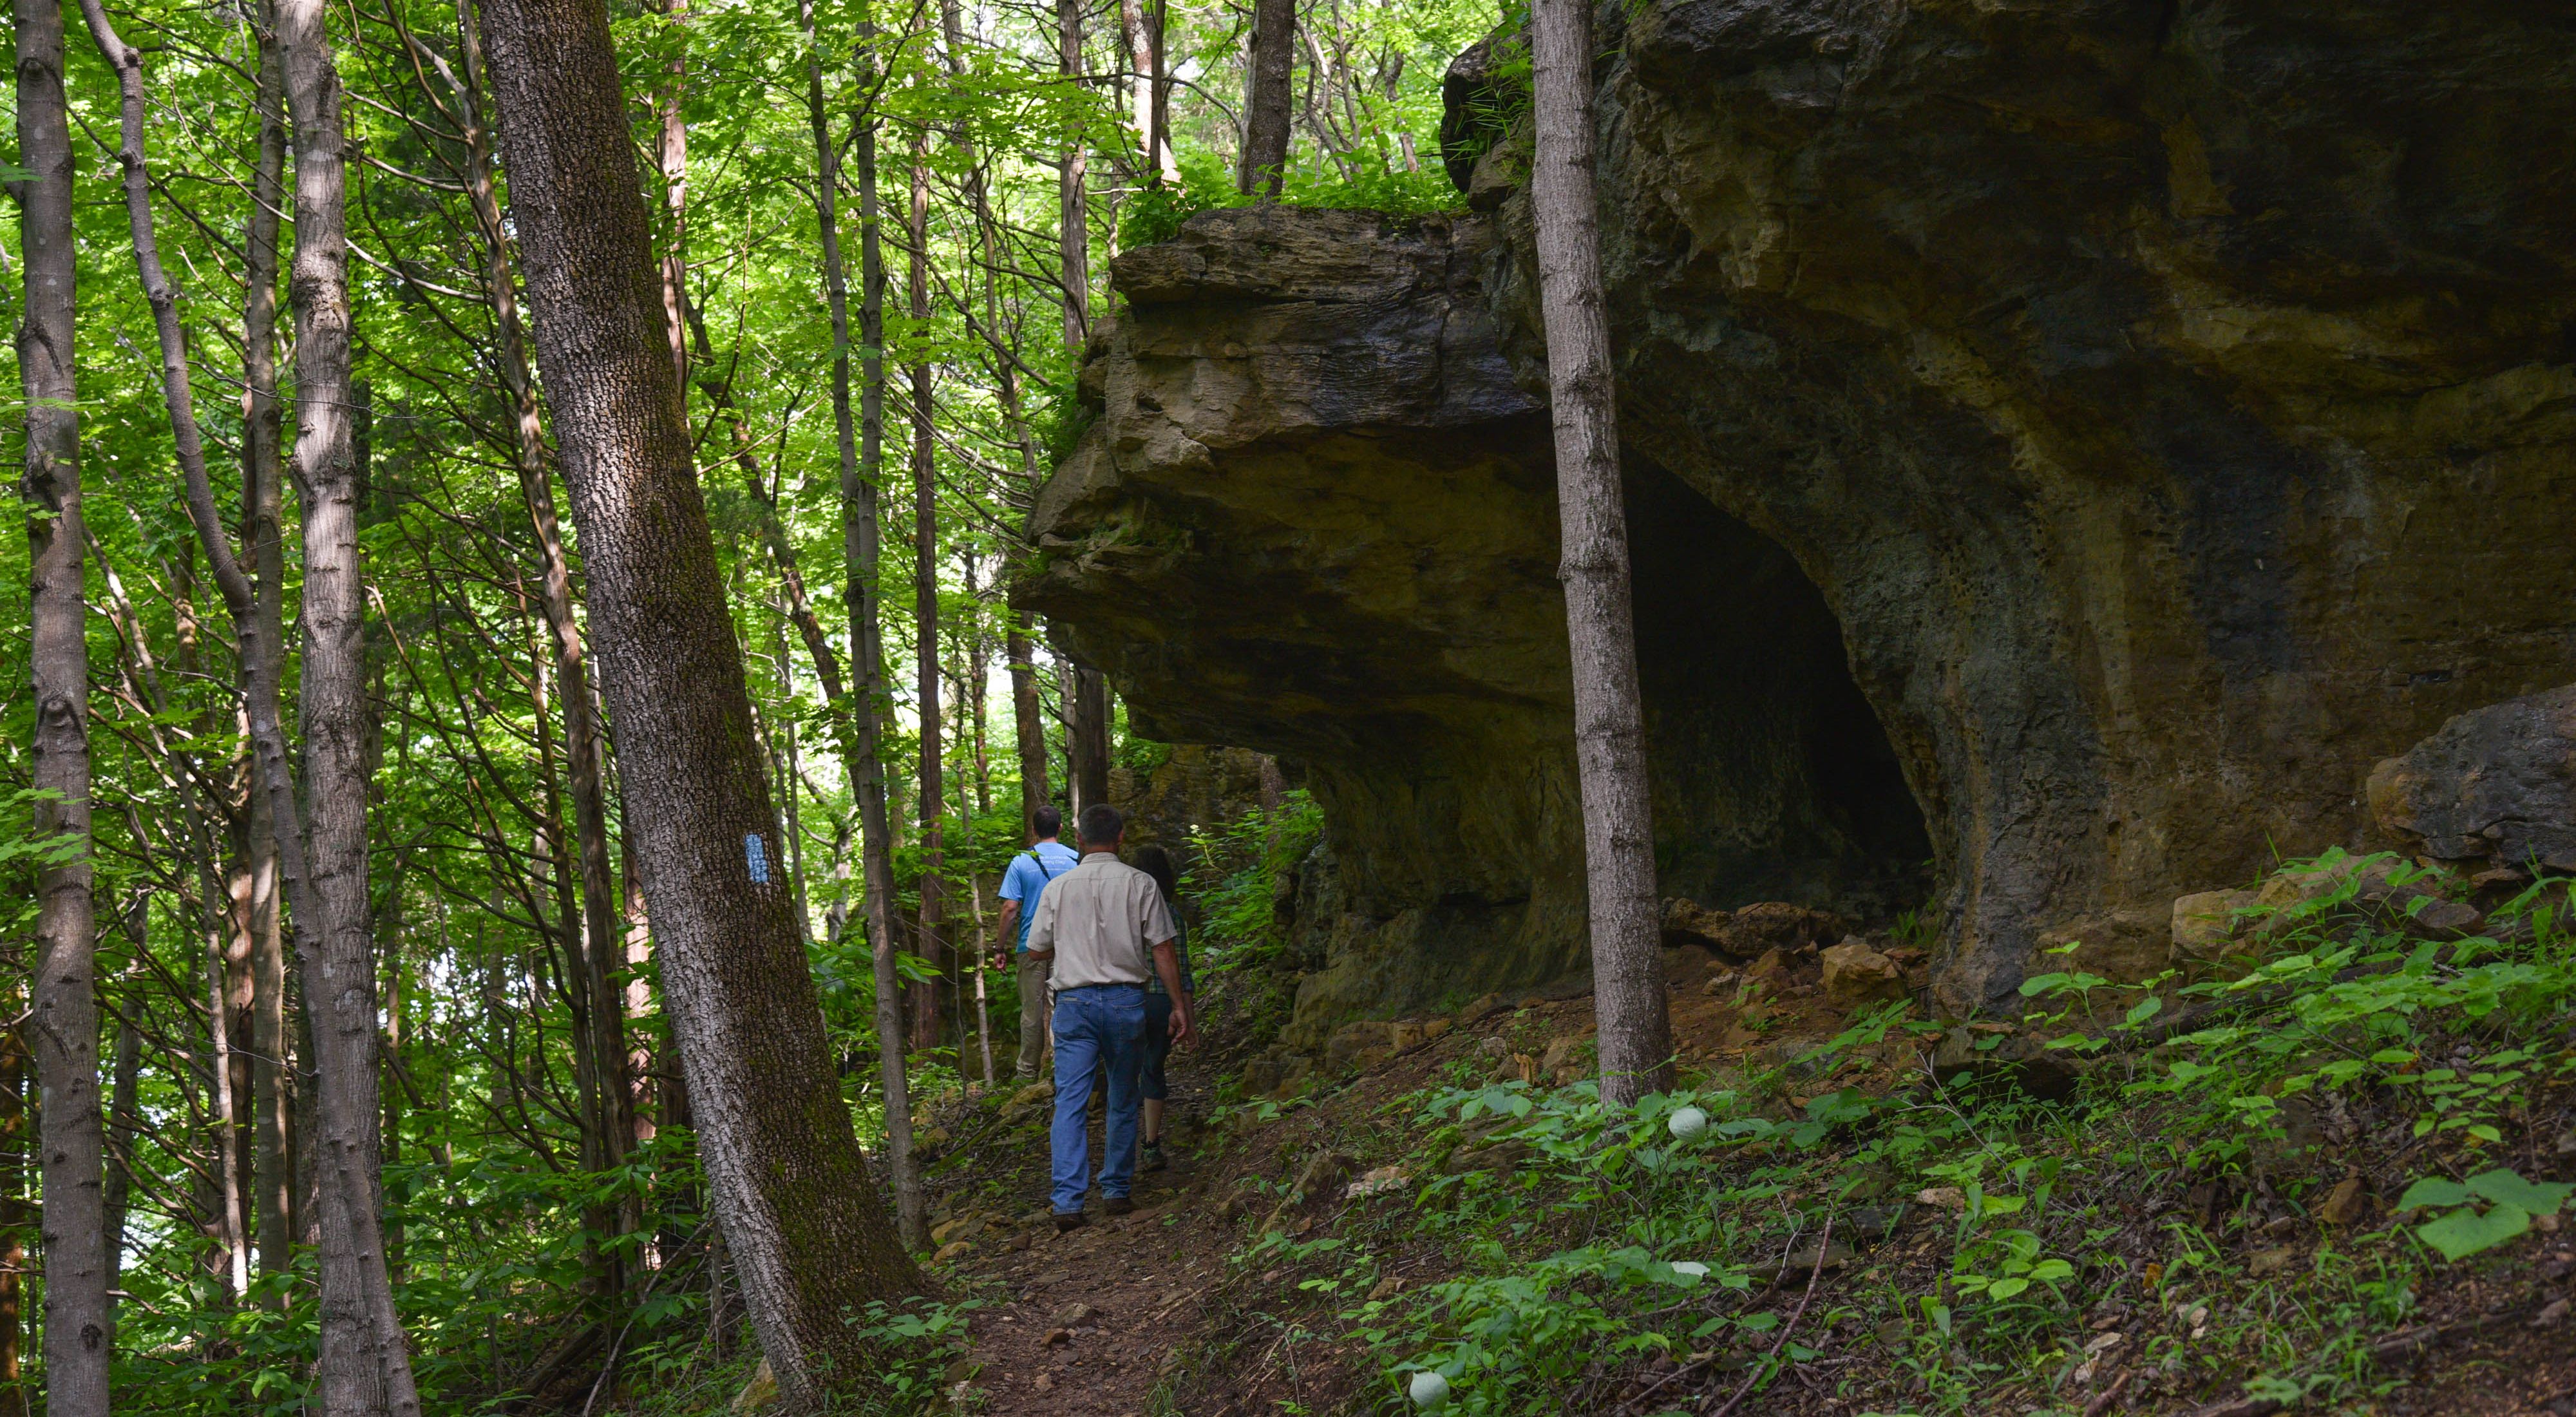 Hikers hike along forested trail at Edge of Appalachia Preserve.